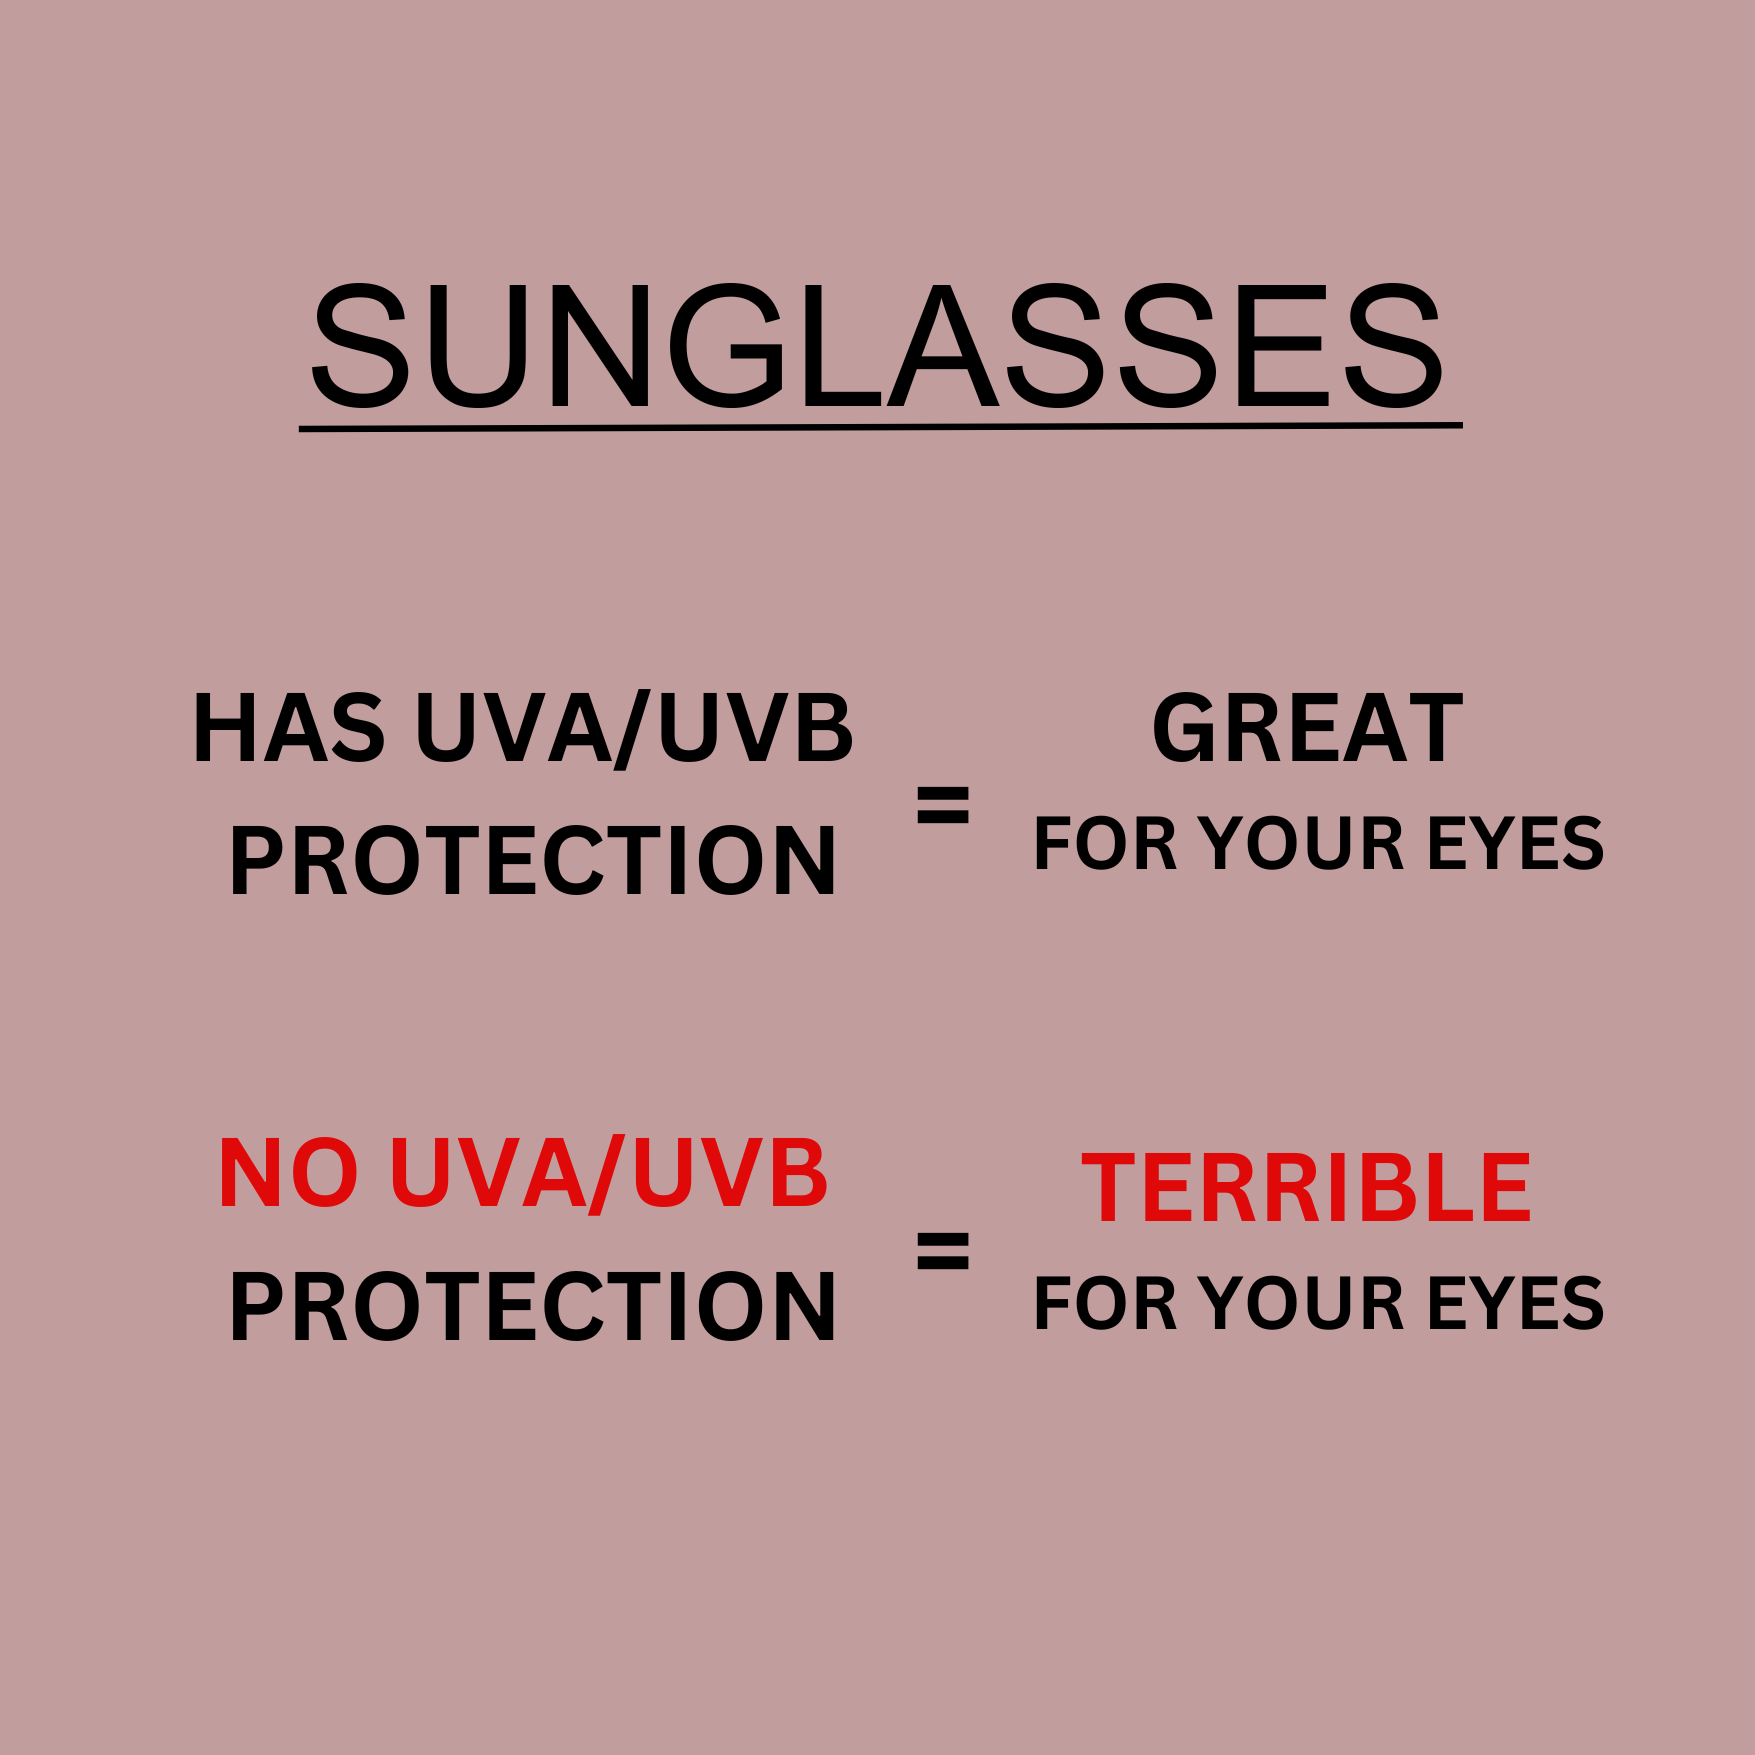 MYTH: Sunglasses are bad for your eyes